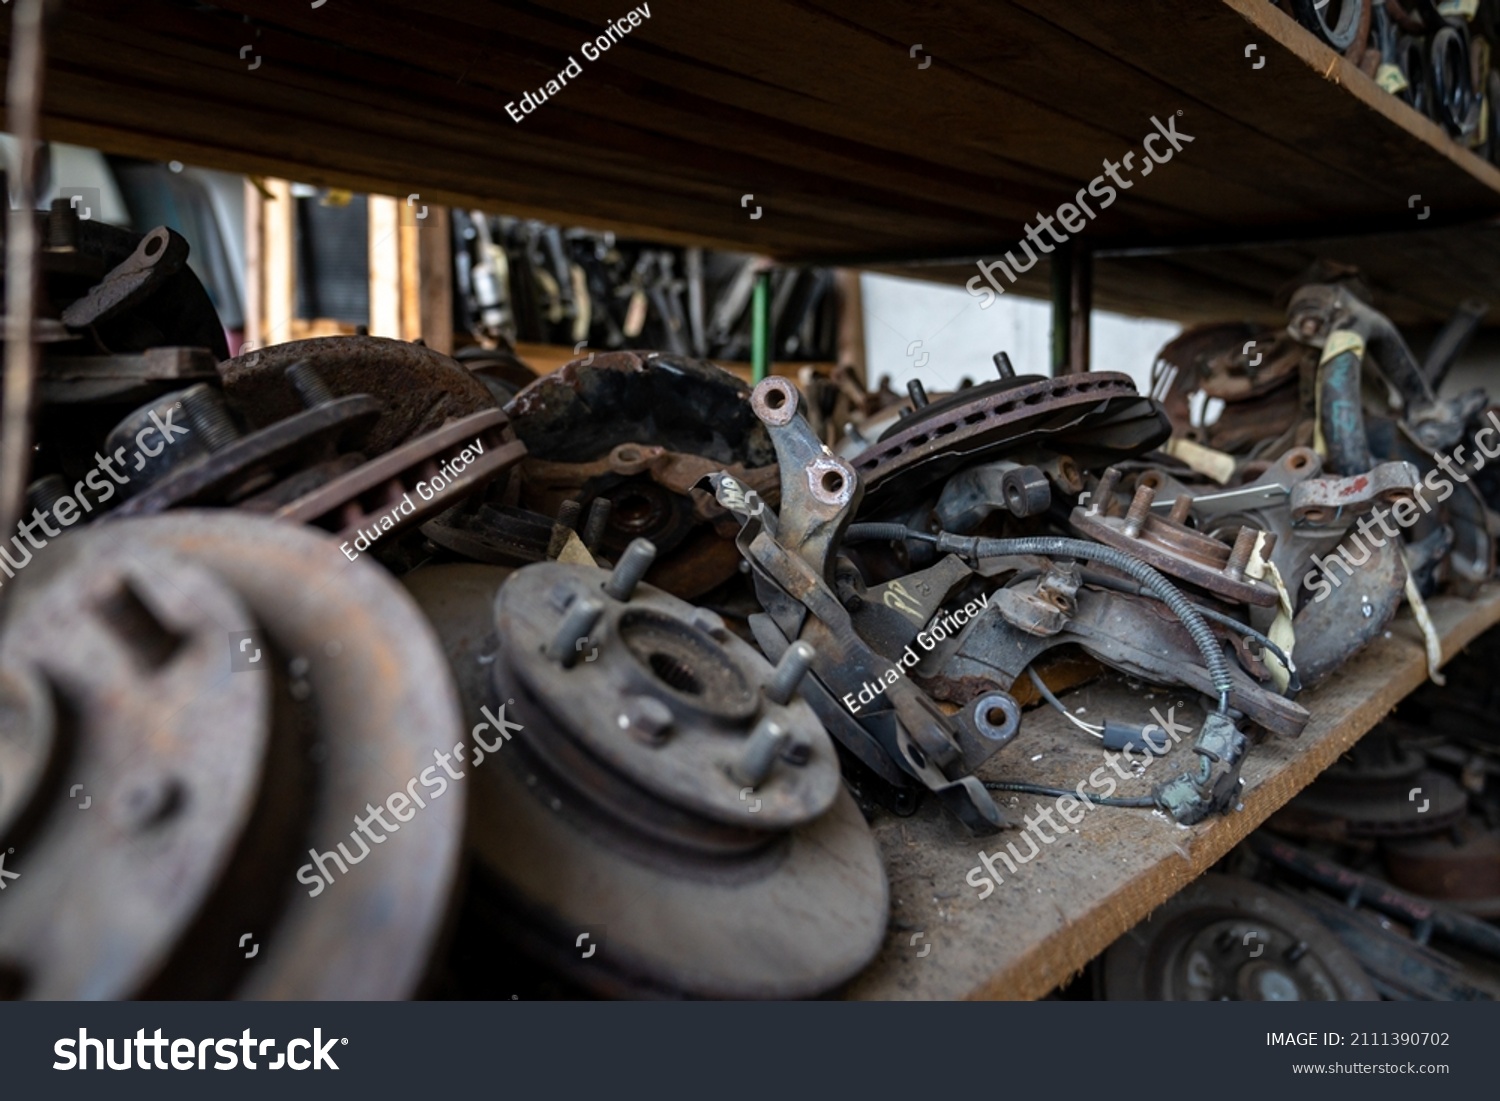 parts of dismantled cars at the car wreck #2111390702